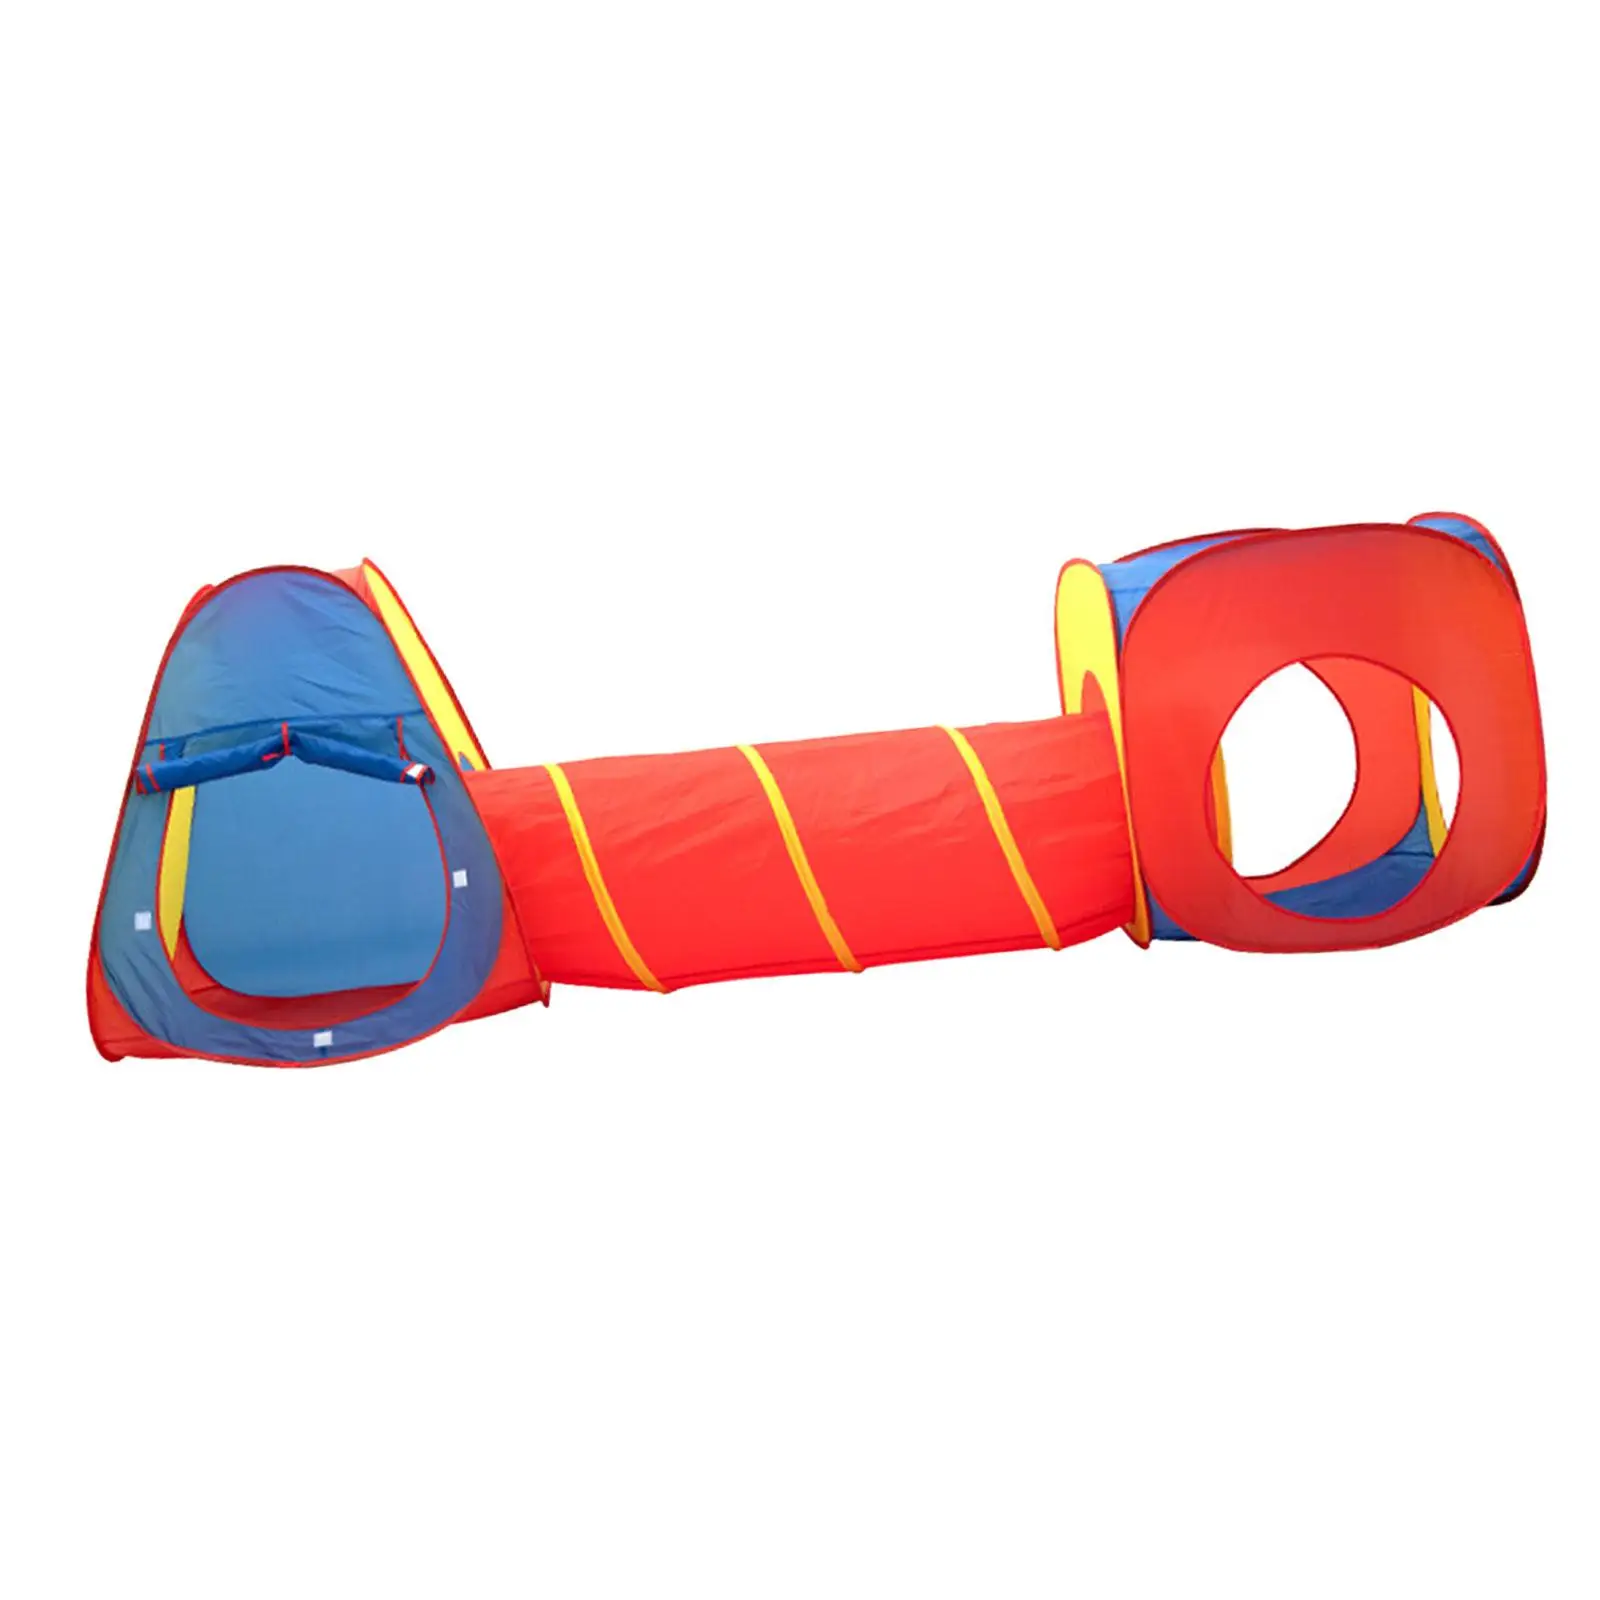 Kids Play Tents with Tunnels Baby Crawl Tunnels for Playground, Parties